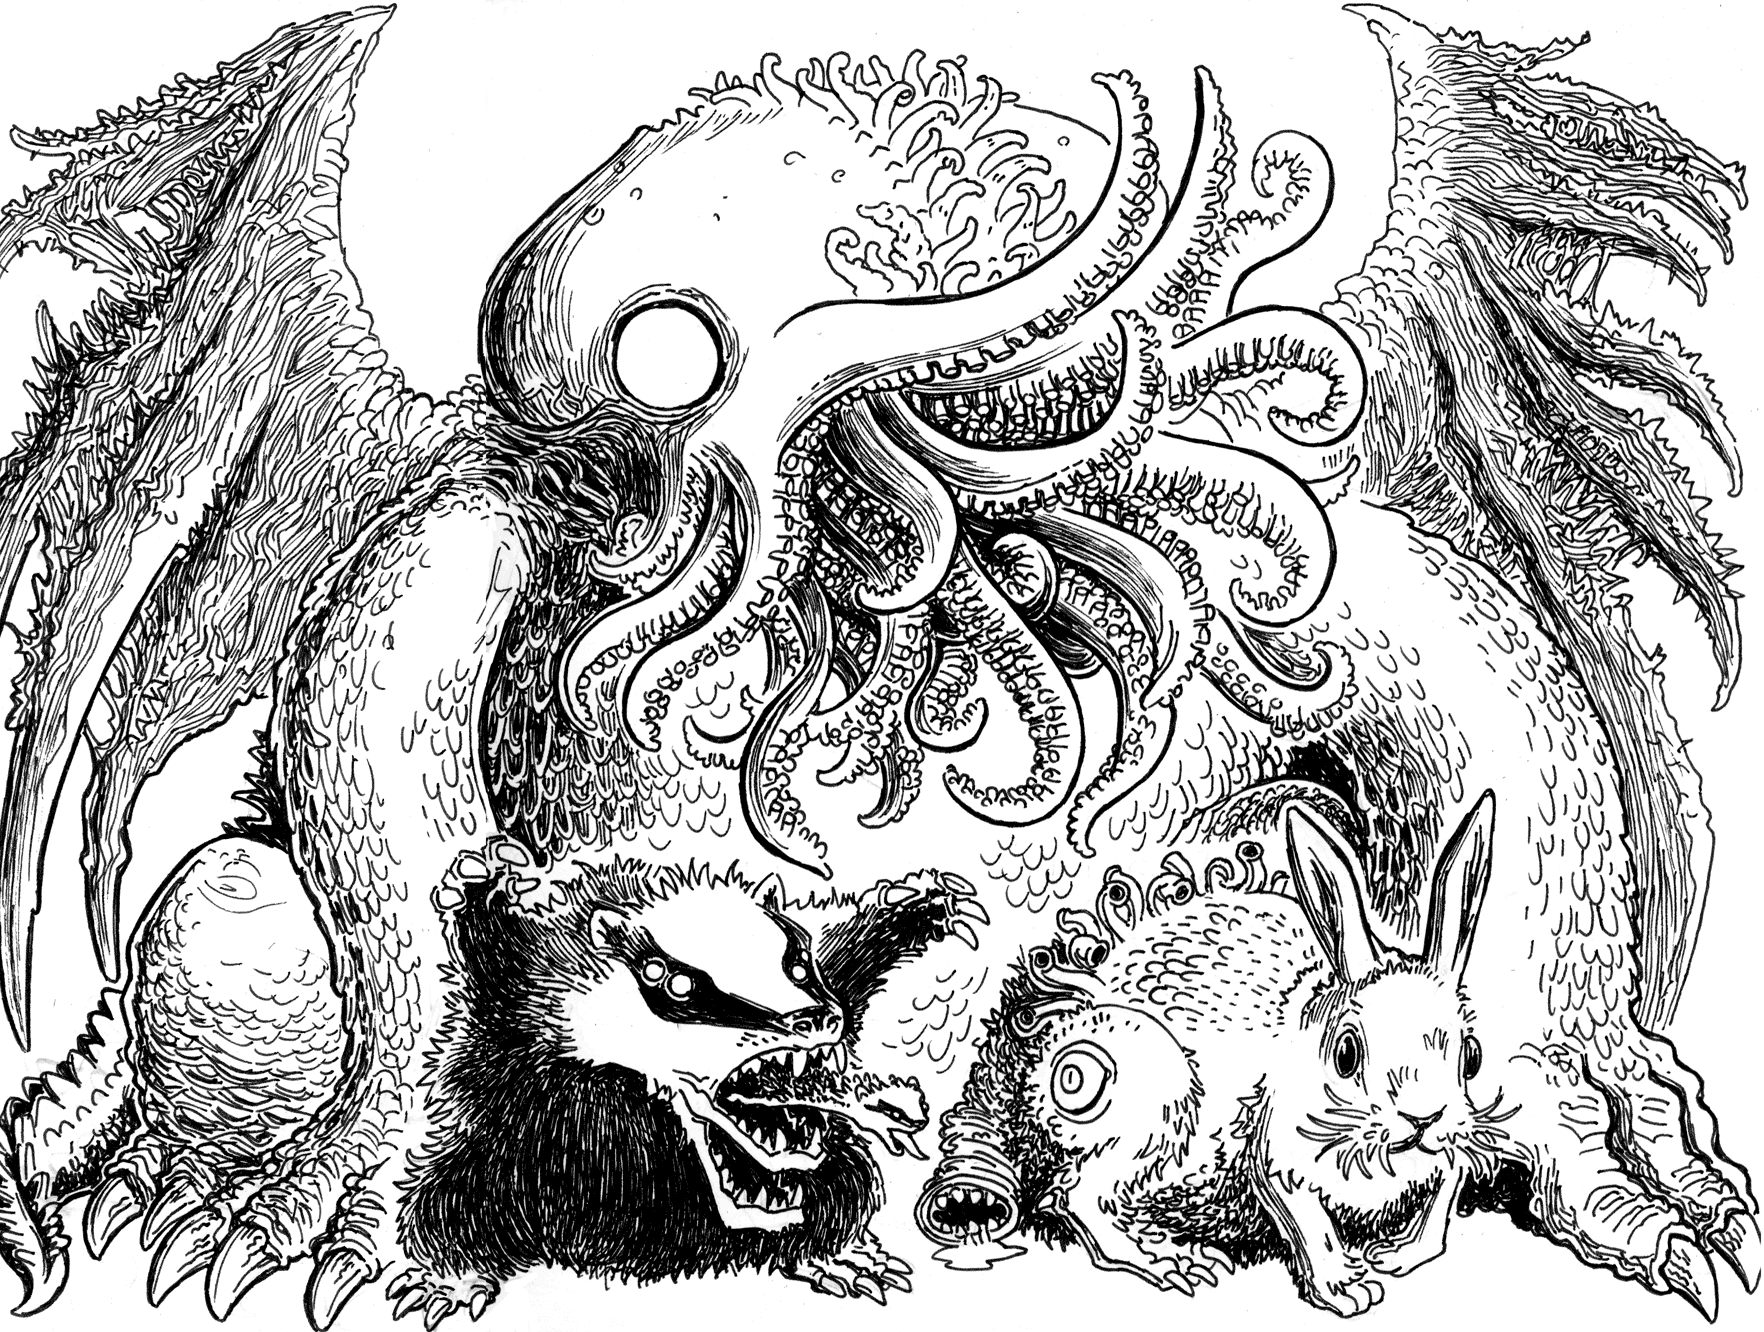 Lovecraft Sketch MWF: Cthulhu and Pets